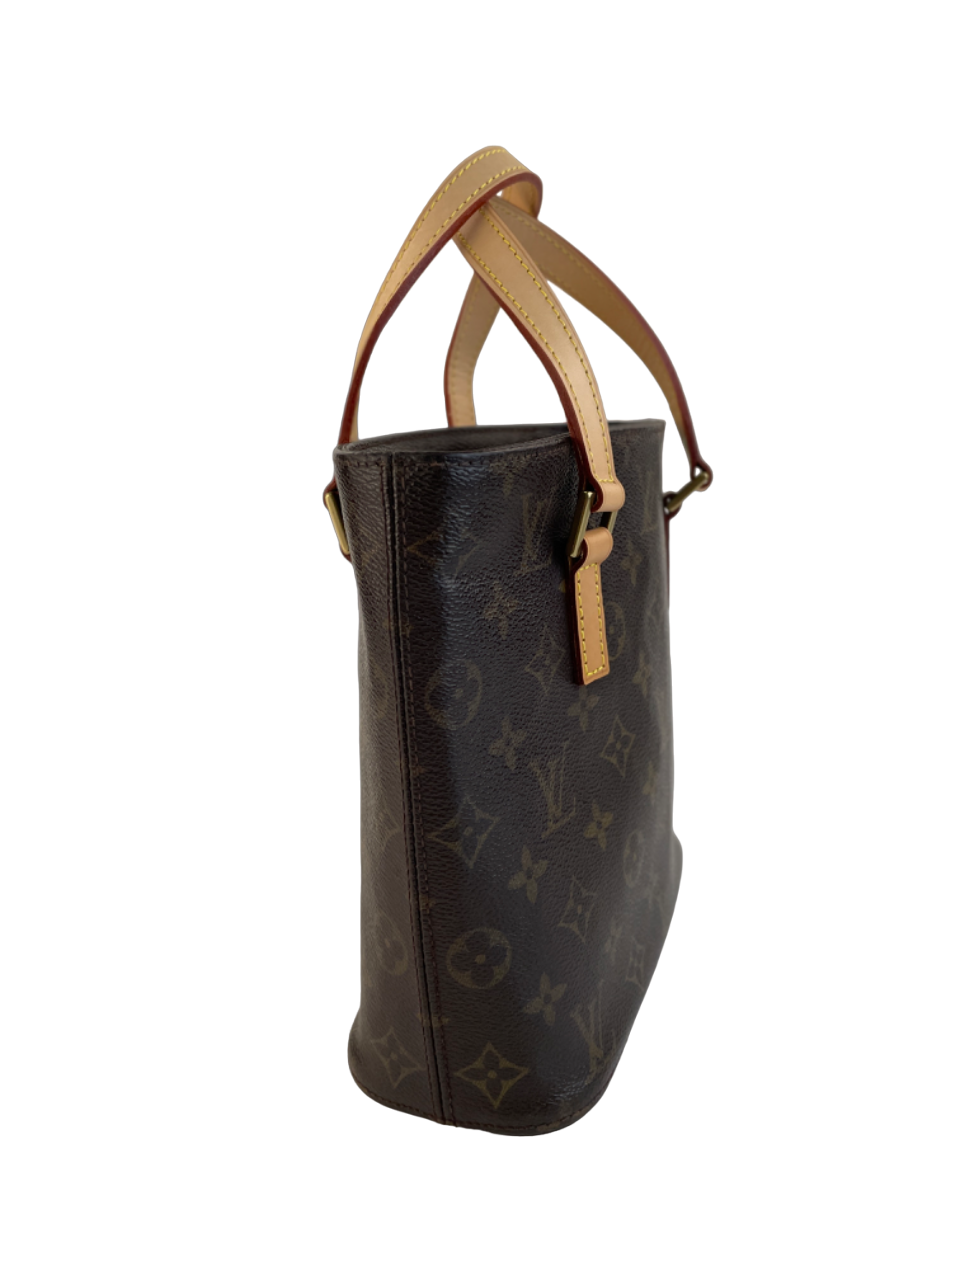 Louis Vuitton 2003 Pre-owned Venice PM Tote Bag - Brown